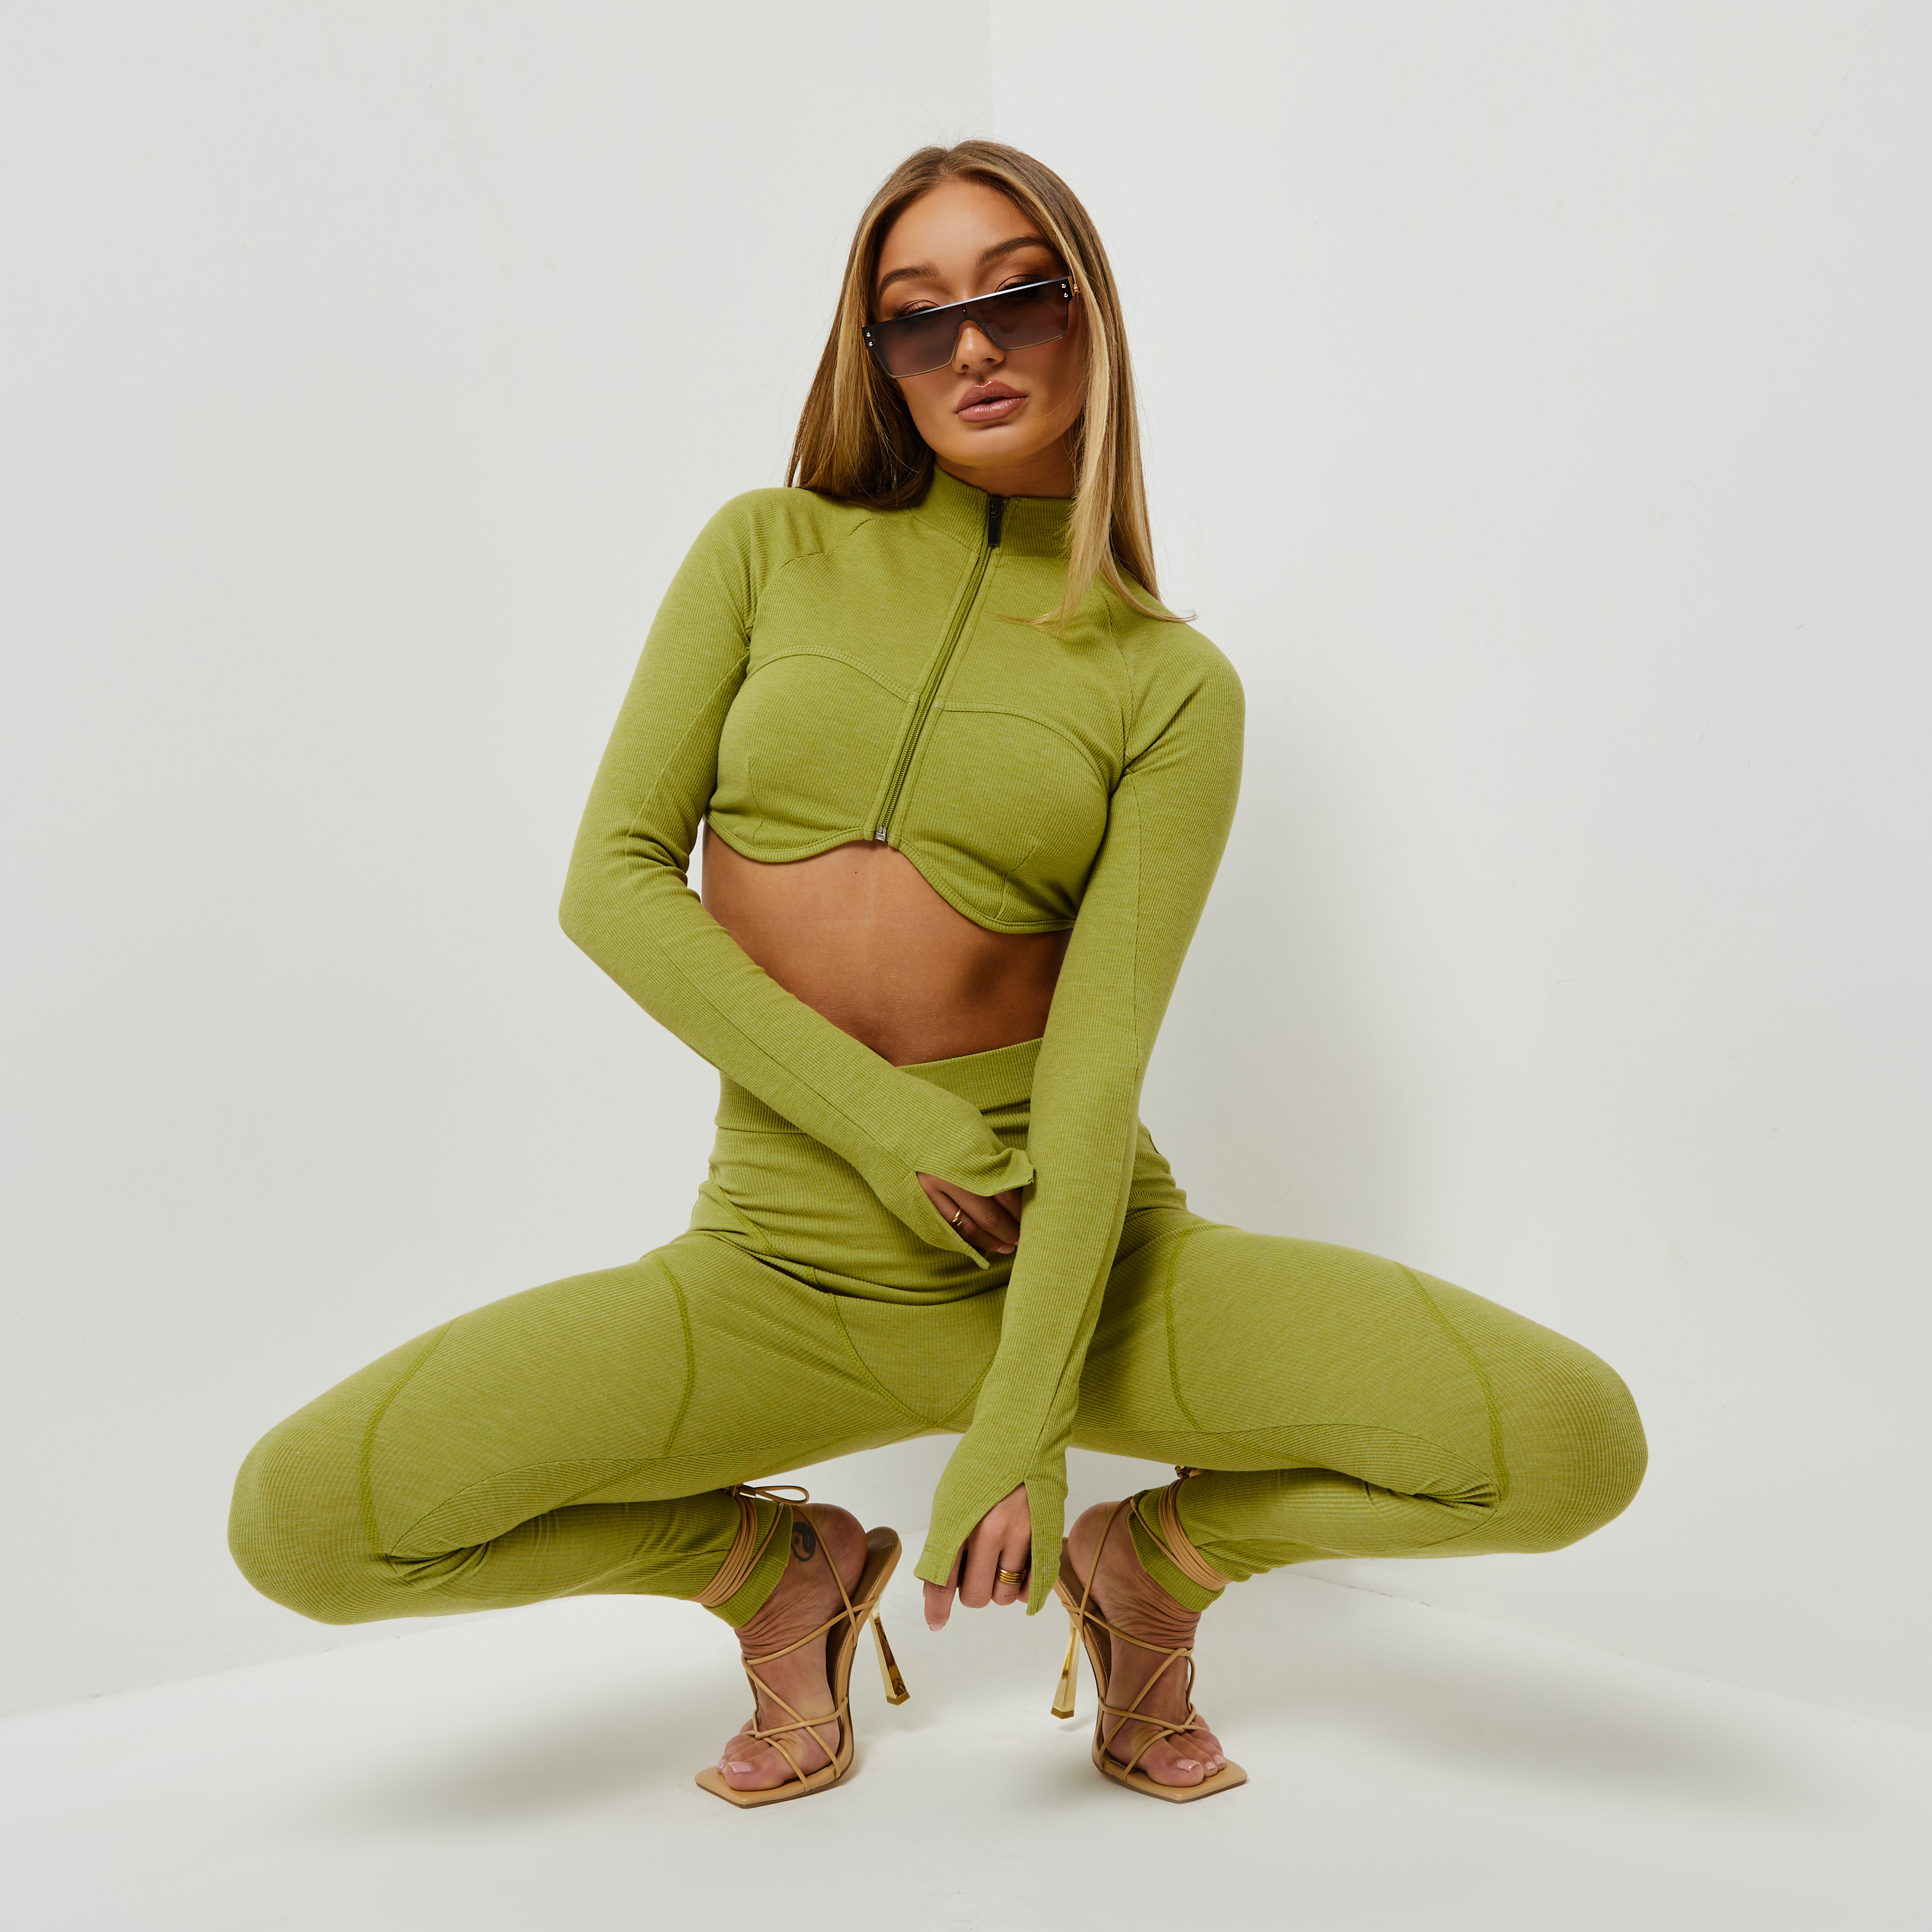 Long Sleeve Under Bust Seam Detail Zip Up Crop Top In Olive Green Brushed Rib UK 10, Green